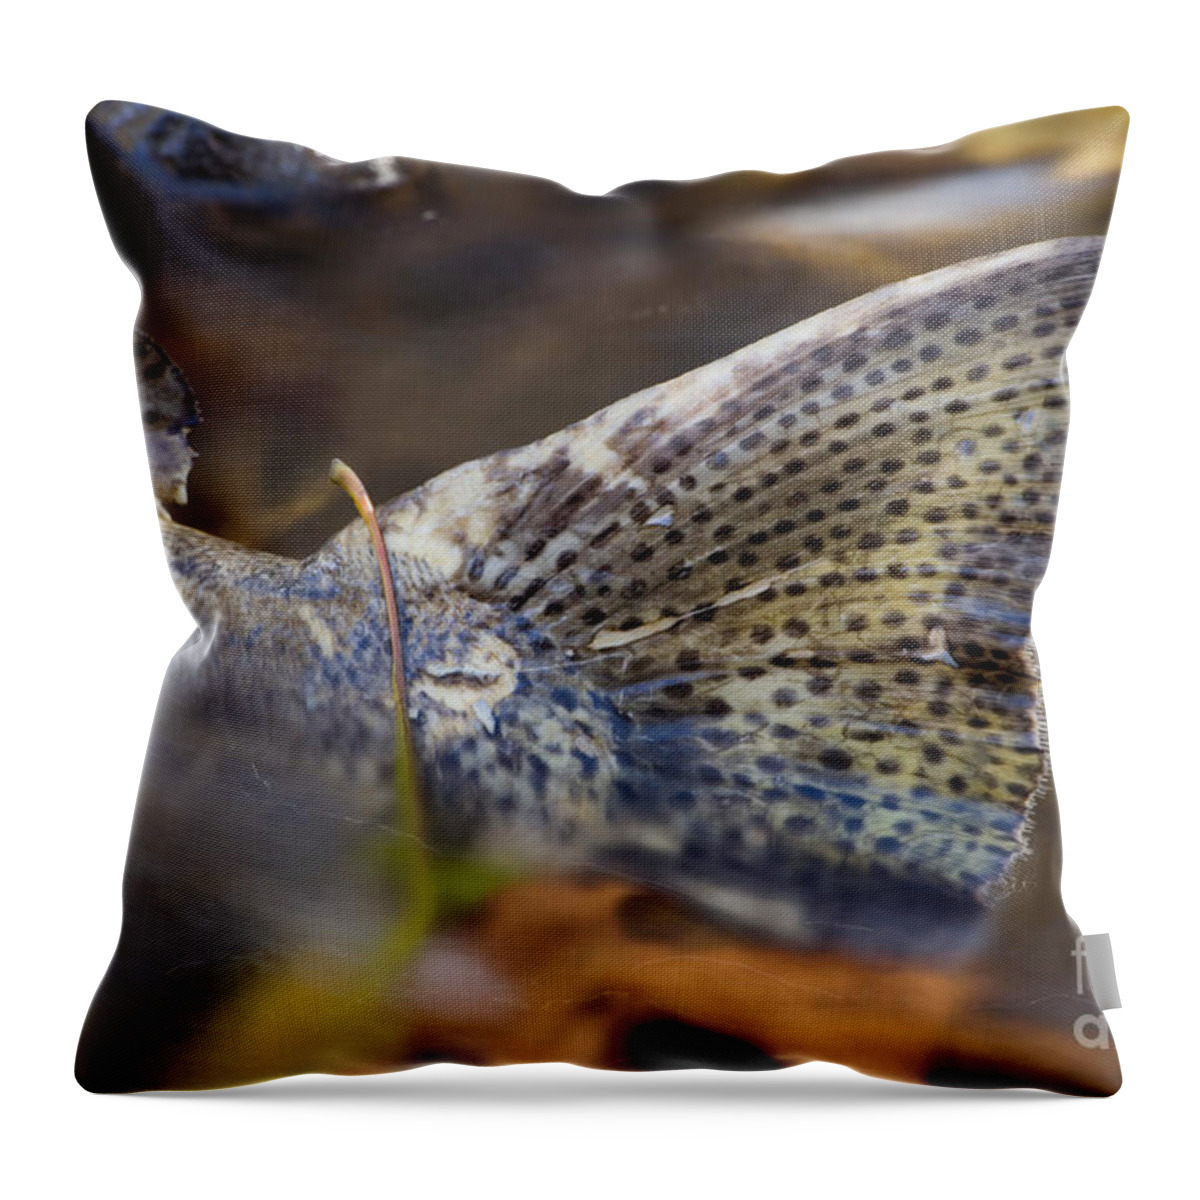 Salmon Throw Pillow featuring the photograph Tail Of A Dead Chinook Salmon by Ted Kinsman